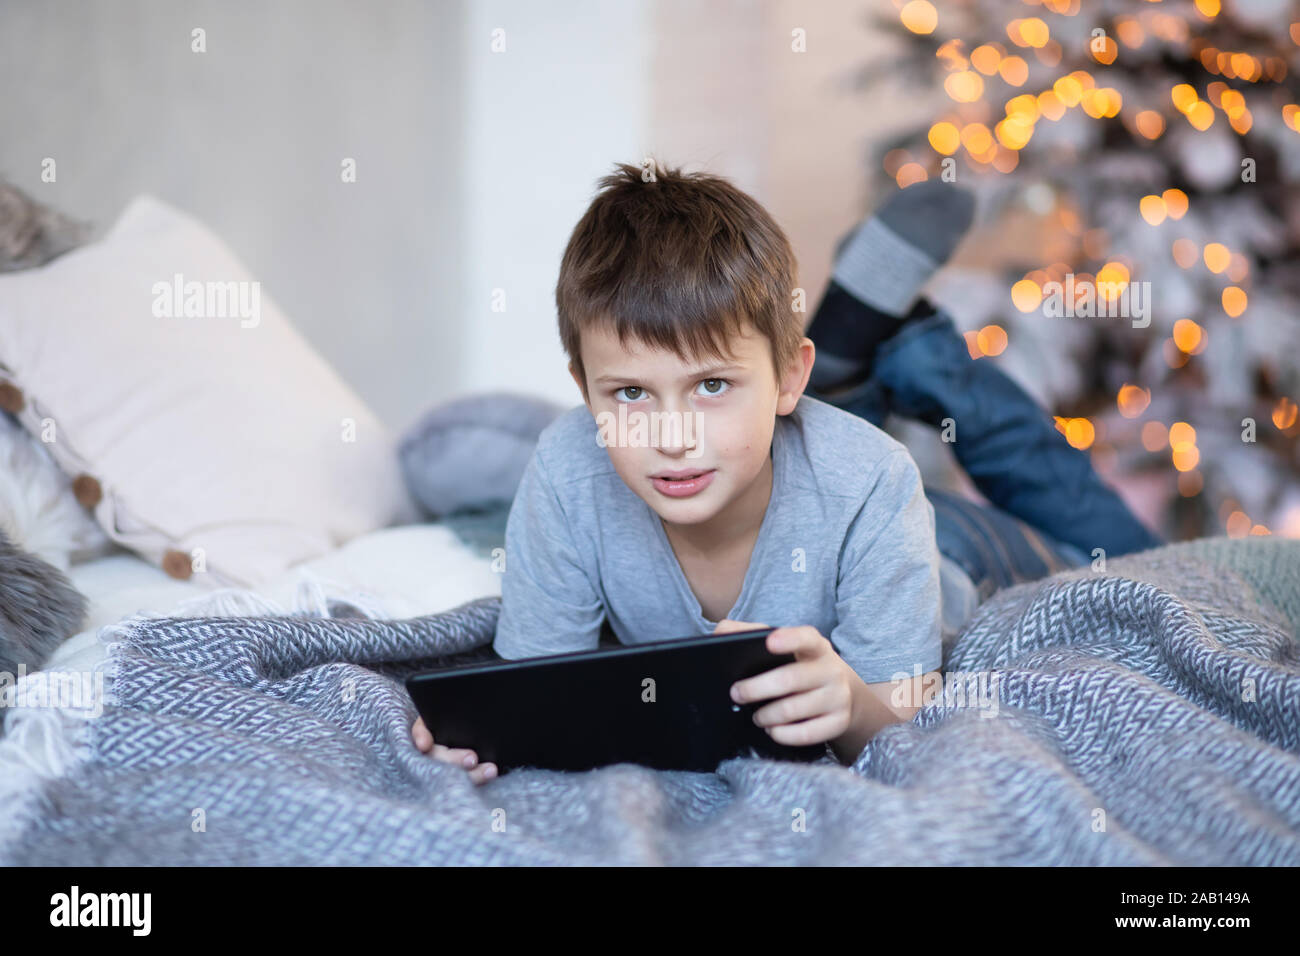 serious boy holding tablet in hands. child plays computer games on tablet. boy lies on bed opposite Christmas tree before Christmas. Black Friday and Stock Photo